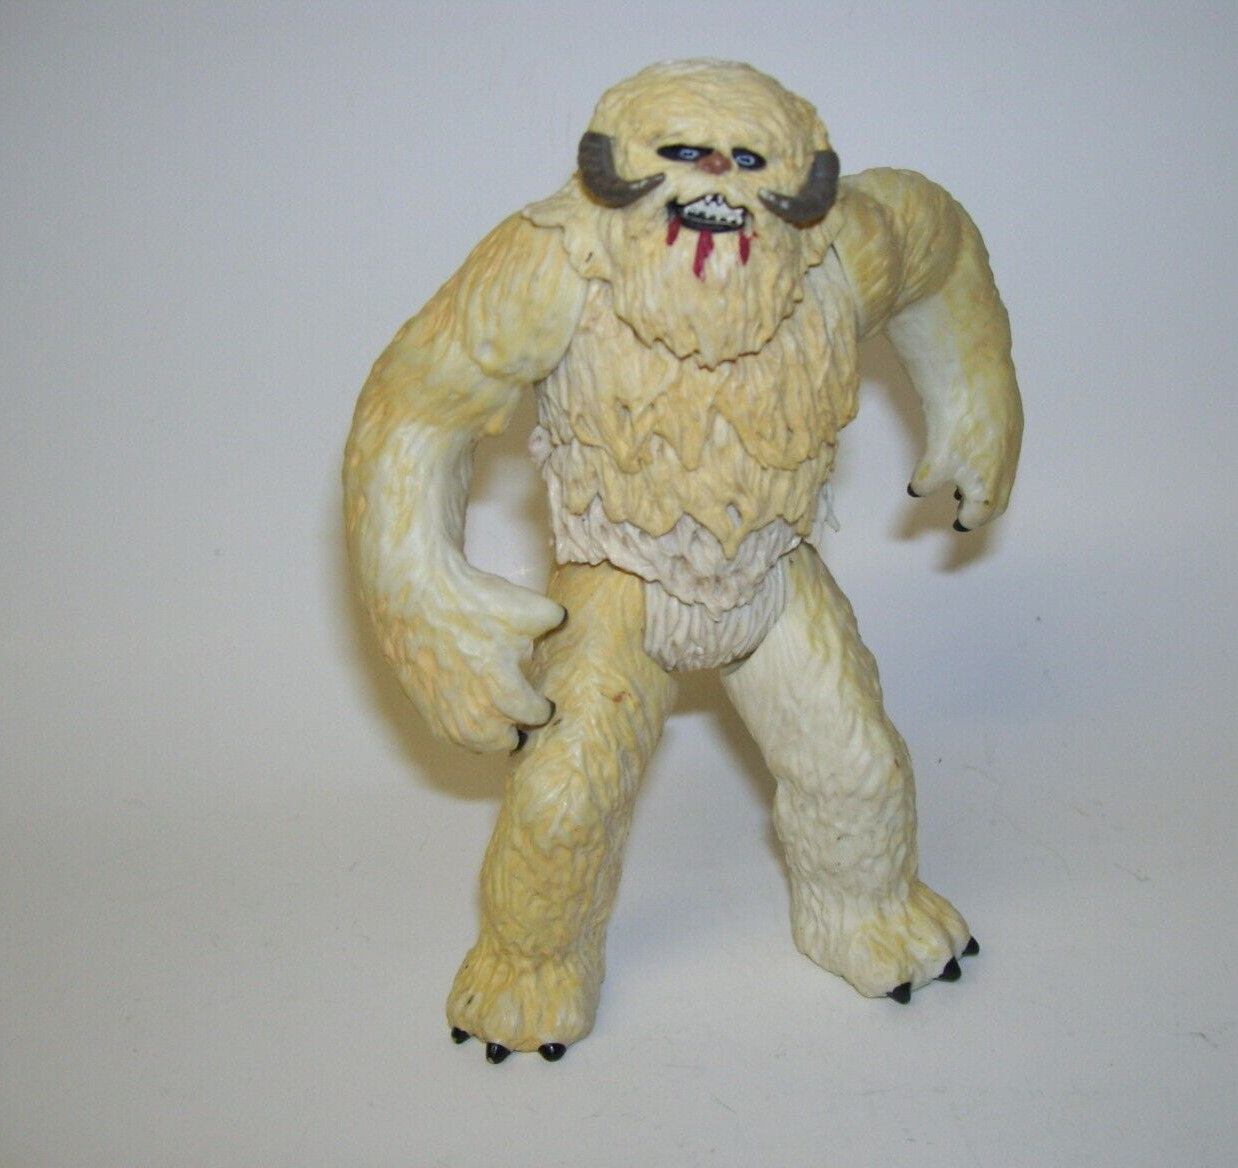 Yeti The Abominable Snowman from Rudolph 2003 LFL